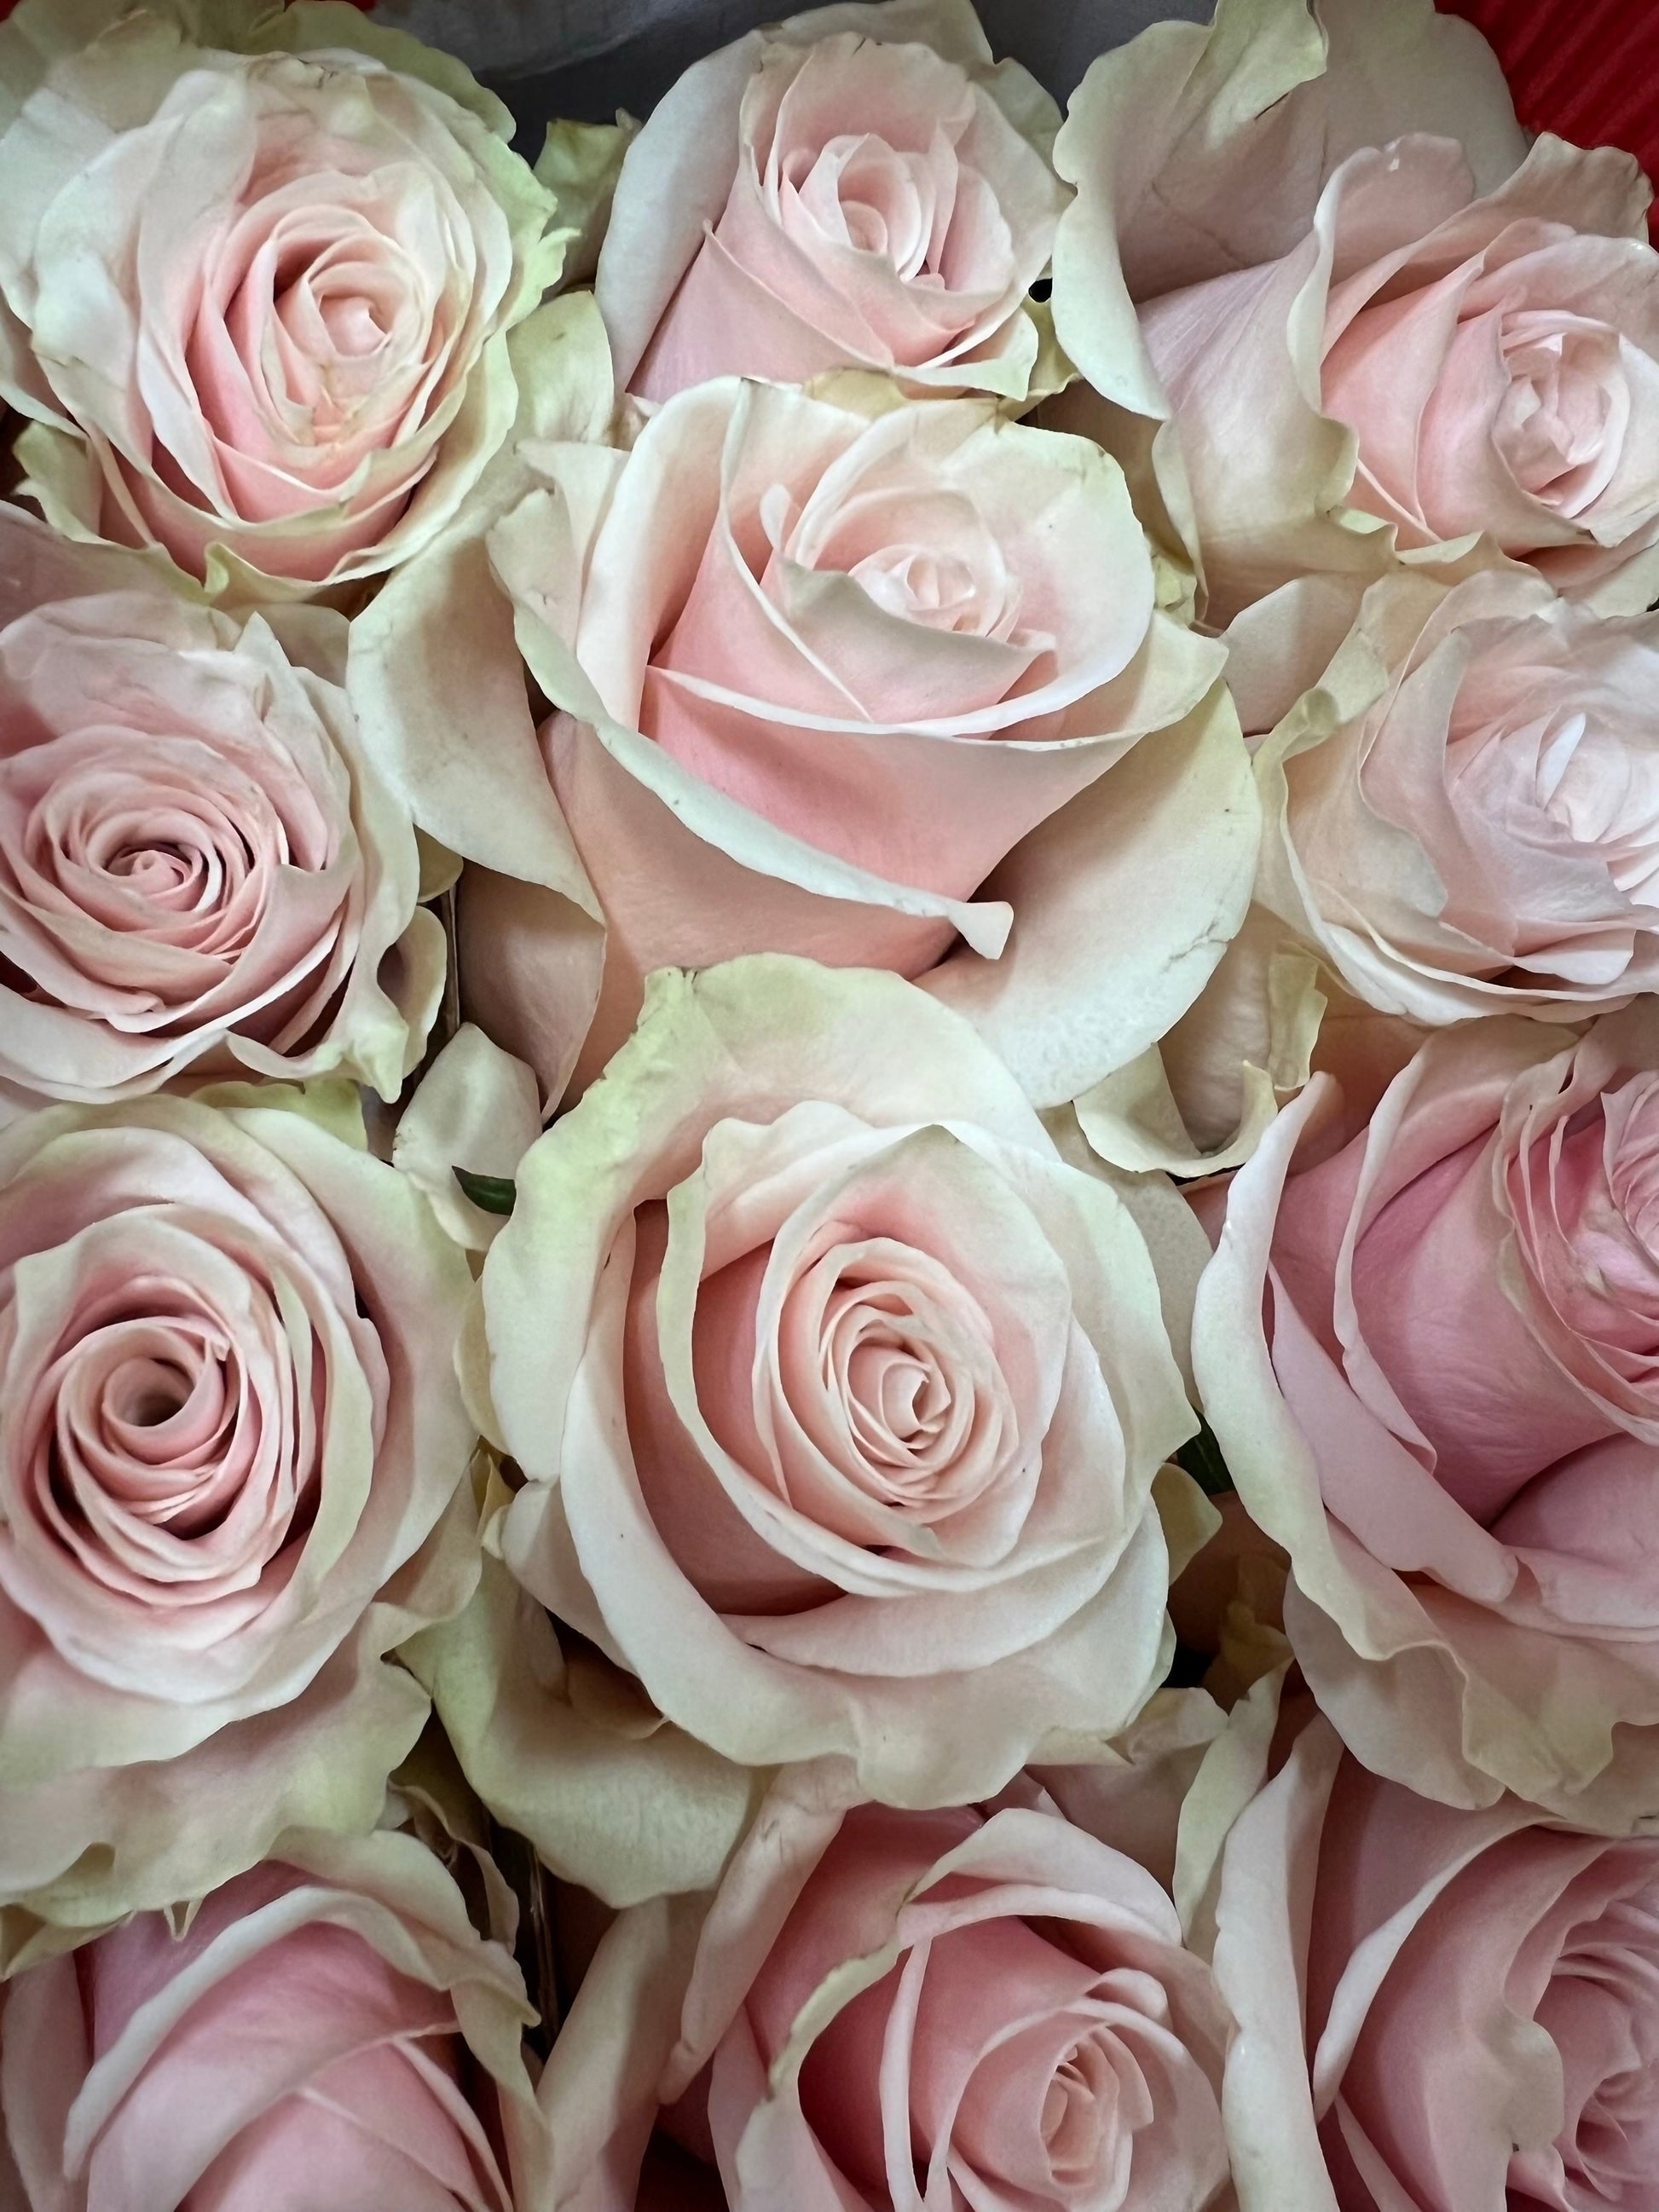 Detail of the Love Story product with pink and white roses presented in a box